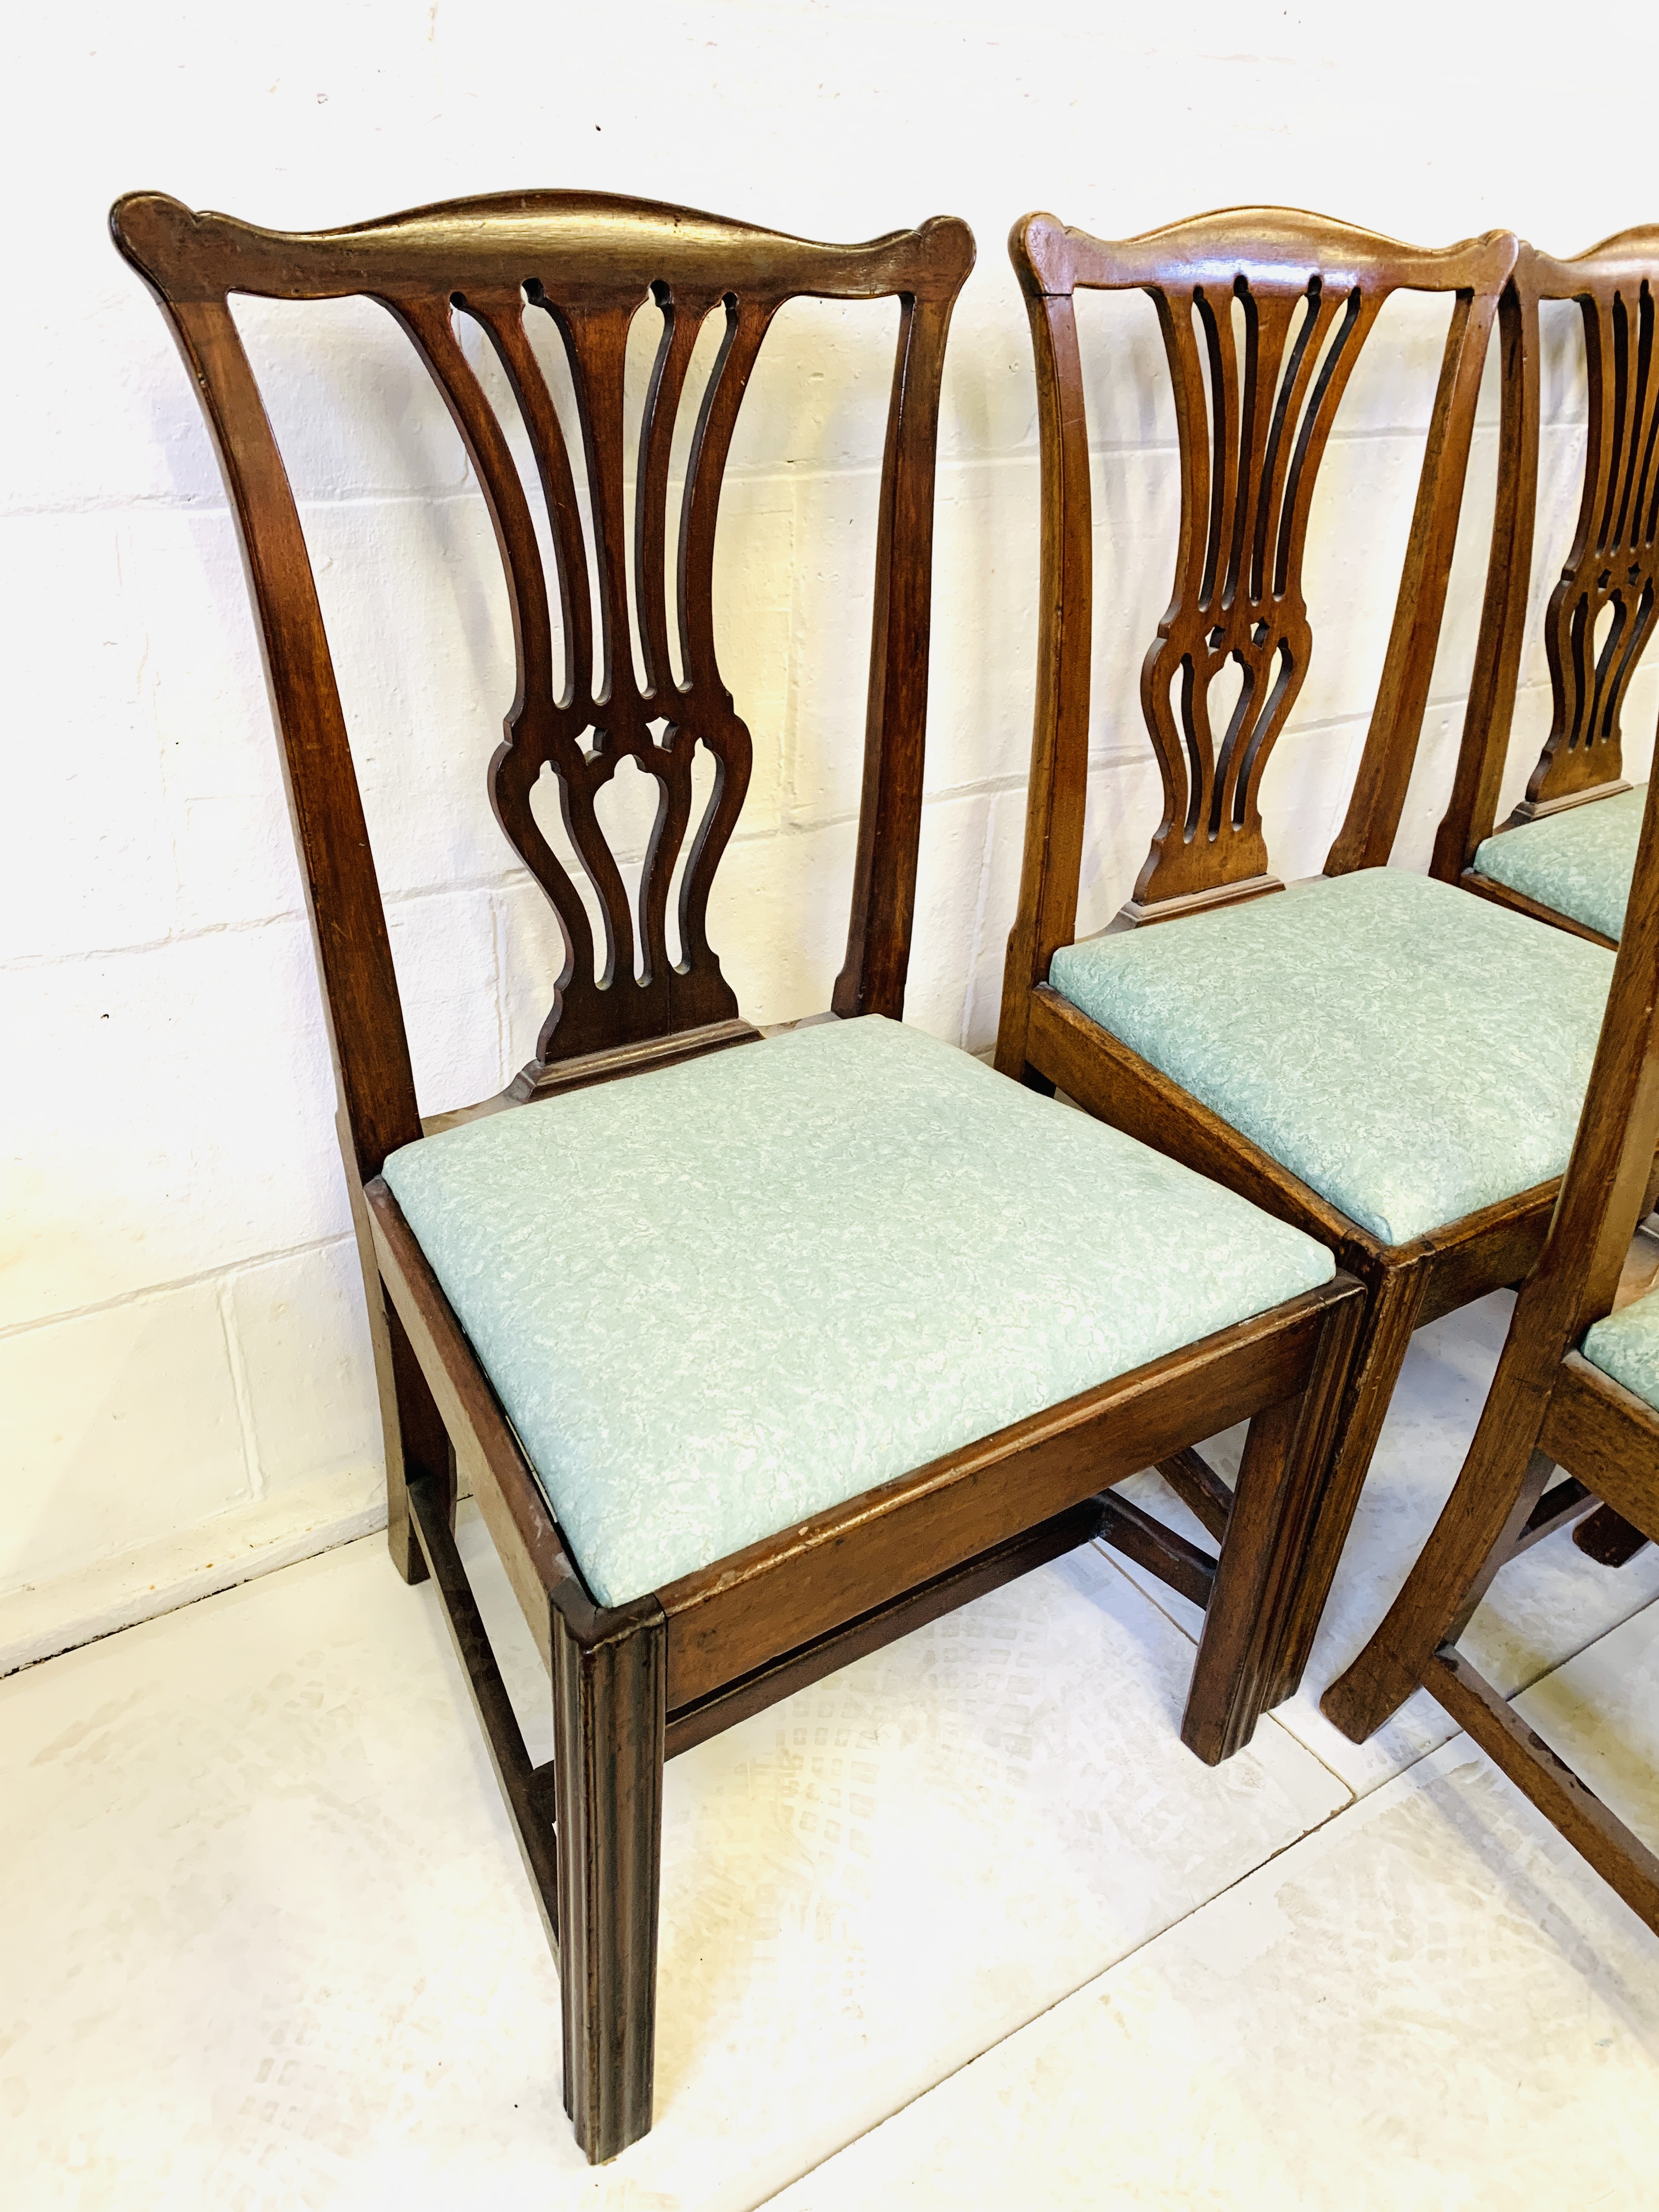 Five mahogany dining chairs with matching carver - Image 4 of 7